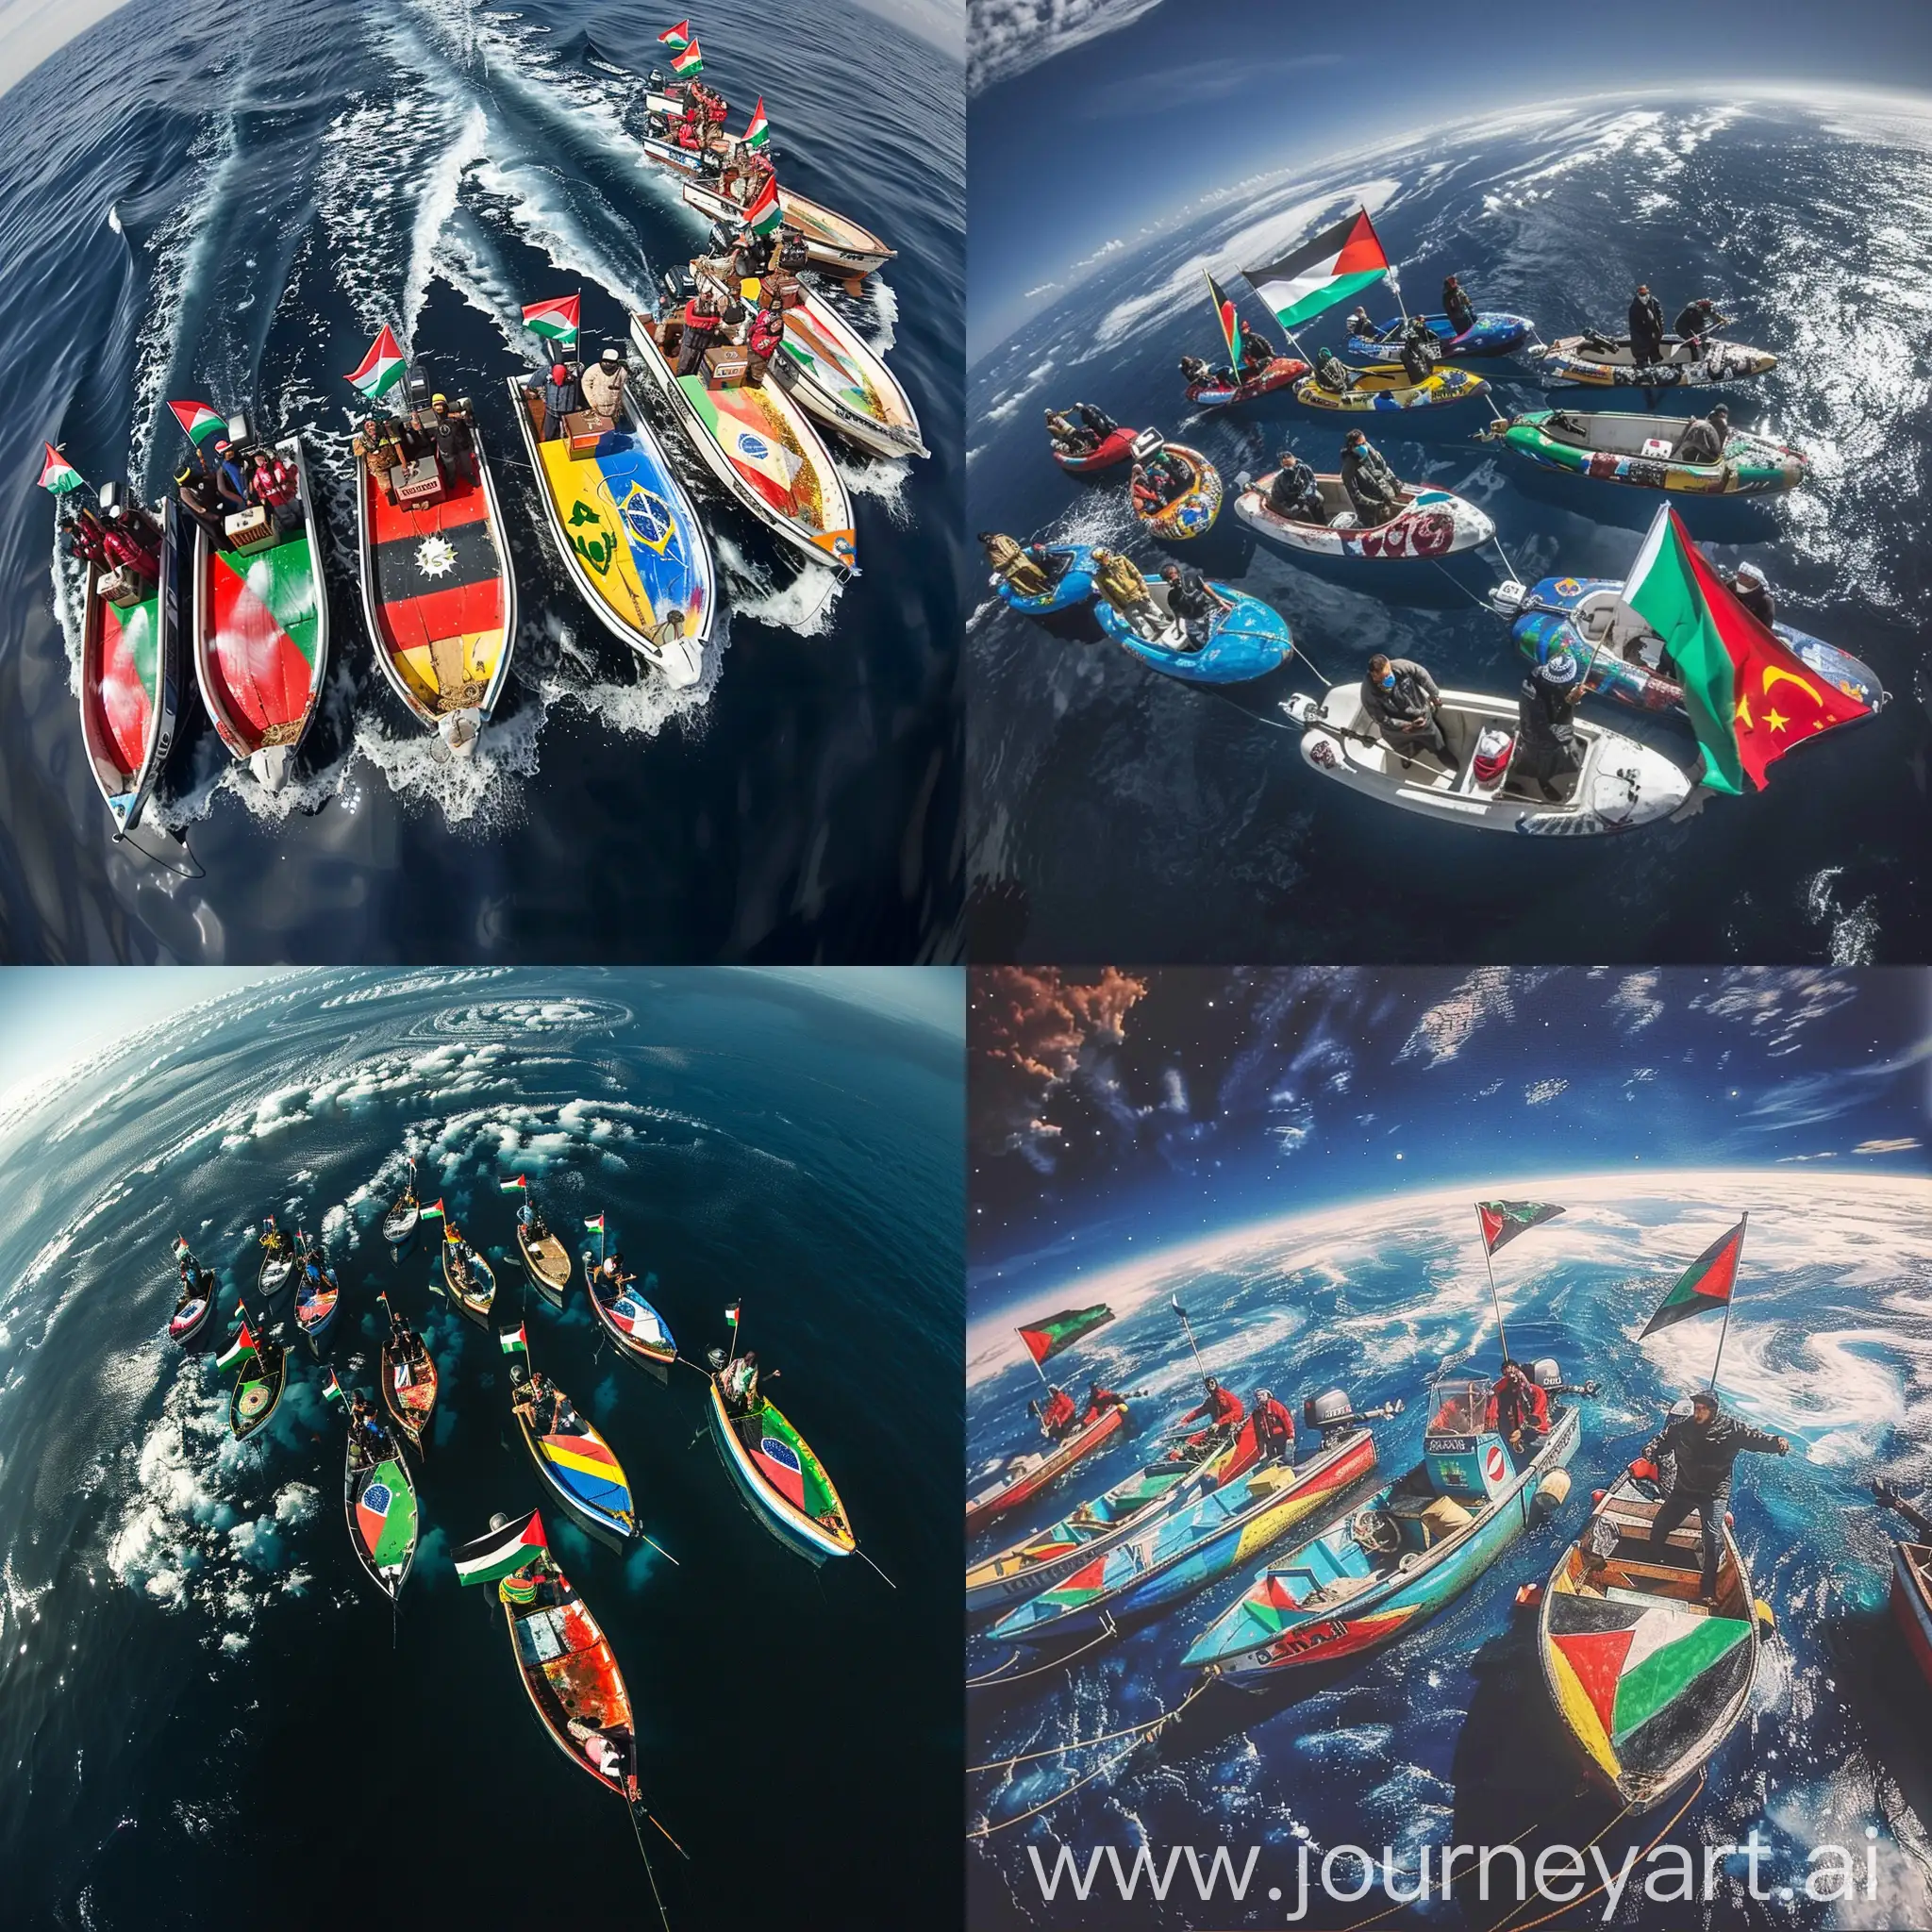 Fishermen with 10 small motorized boats from countries (Brazil, South Africa, Iran, Yemen, Brazil, China, Russia, Mexico, America, Australia) painted their country's flag on the body of the boat, and the fishermen who held the Palestinian flag up towards Palestine  Have had.  View of the image from the top of the Earth's atmosphere